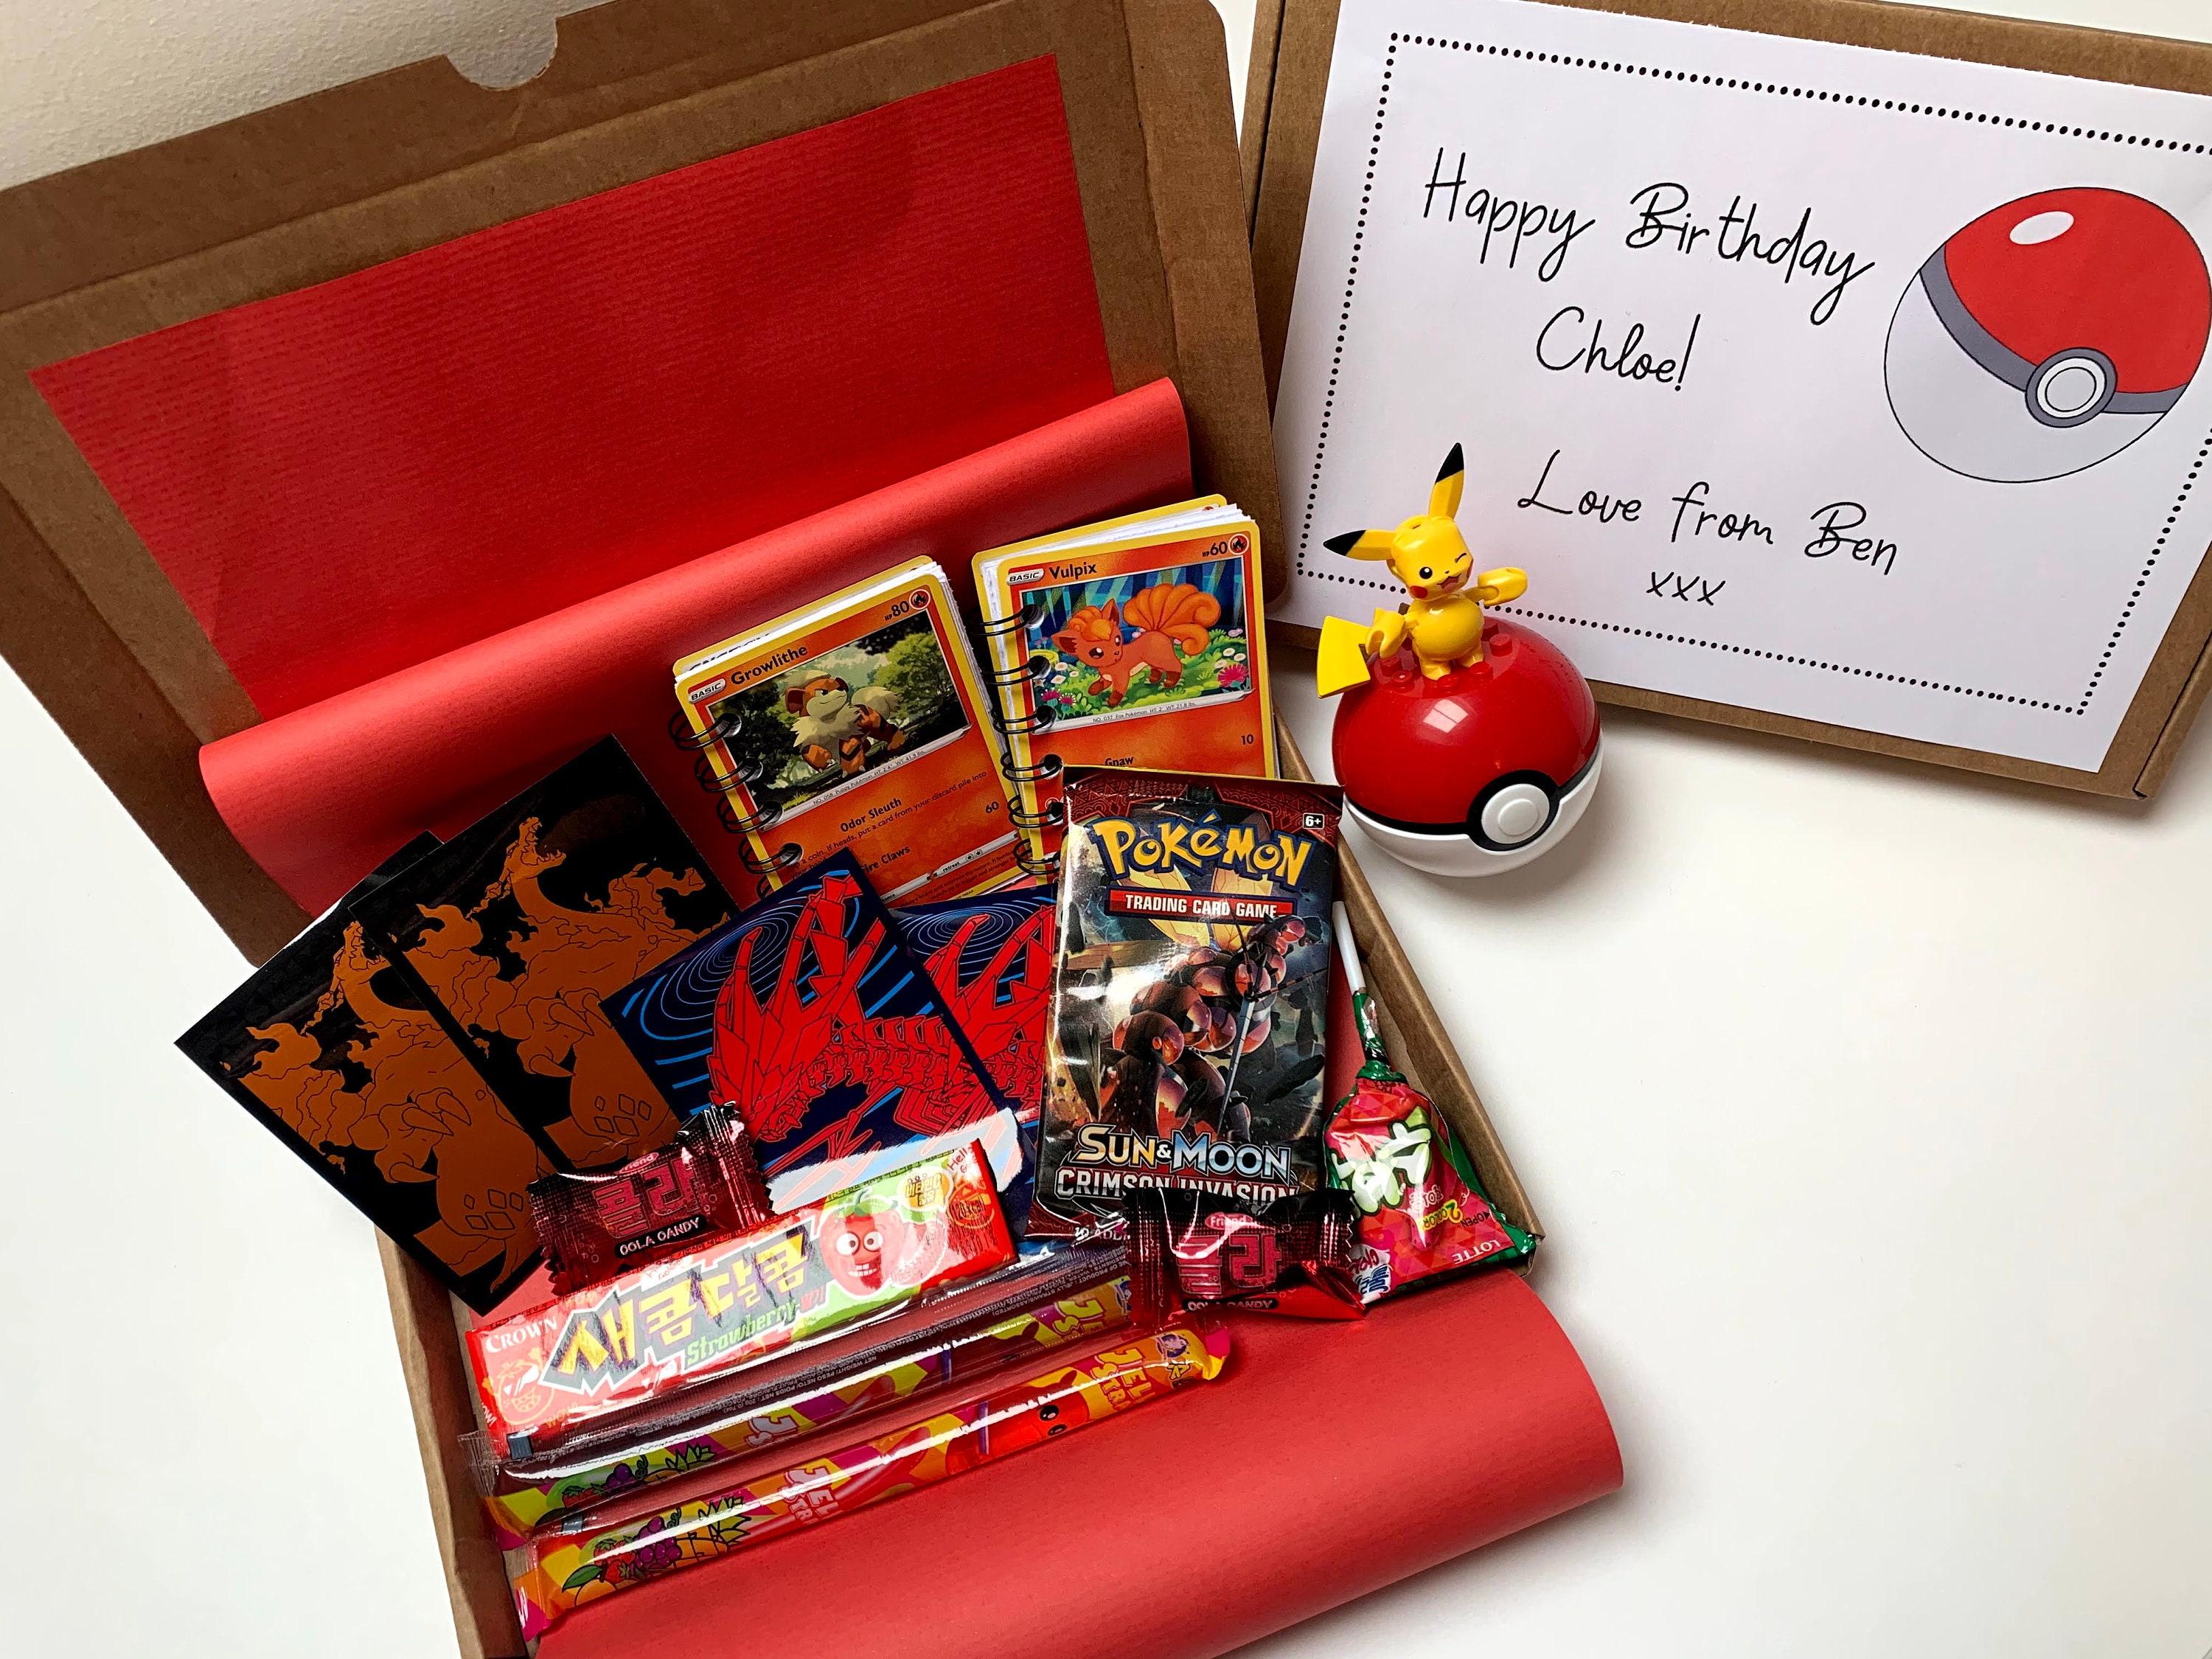 Xxx Blue Dart Video - PokÃ©mon Gift Box Includes a Pack of Cards Birthday Gift - Etsy